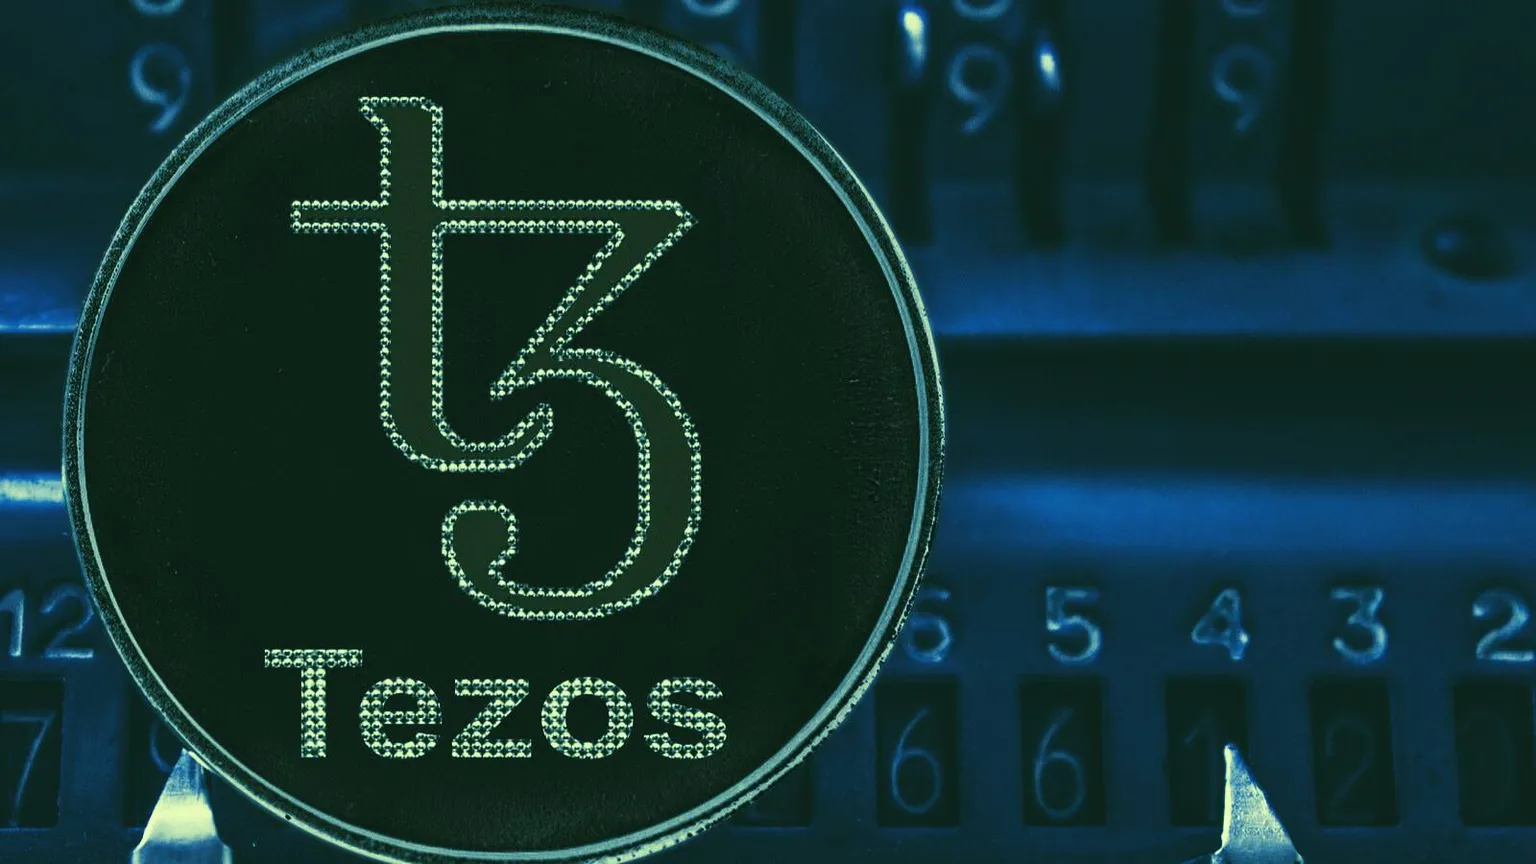 Tezos overshadows EOS as it surpasses in both volume and price. Image: Shutterstock